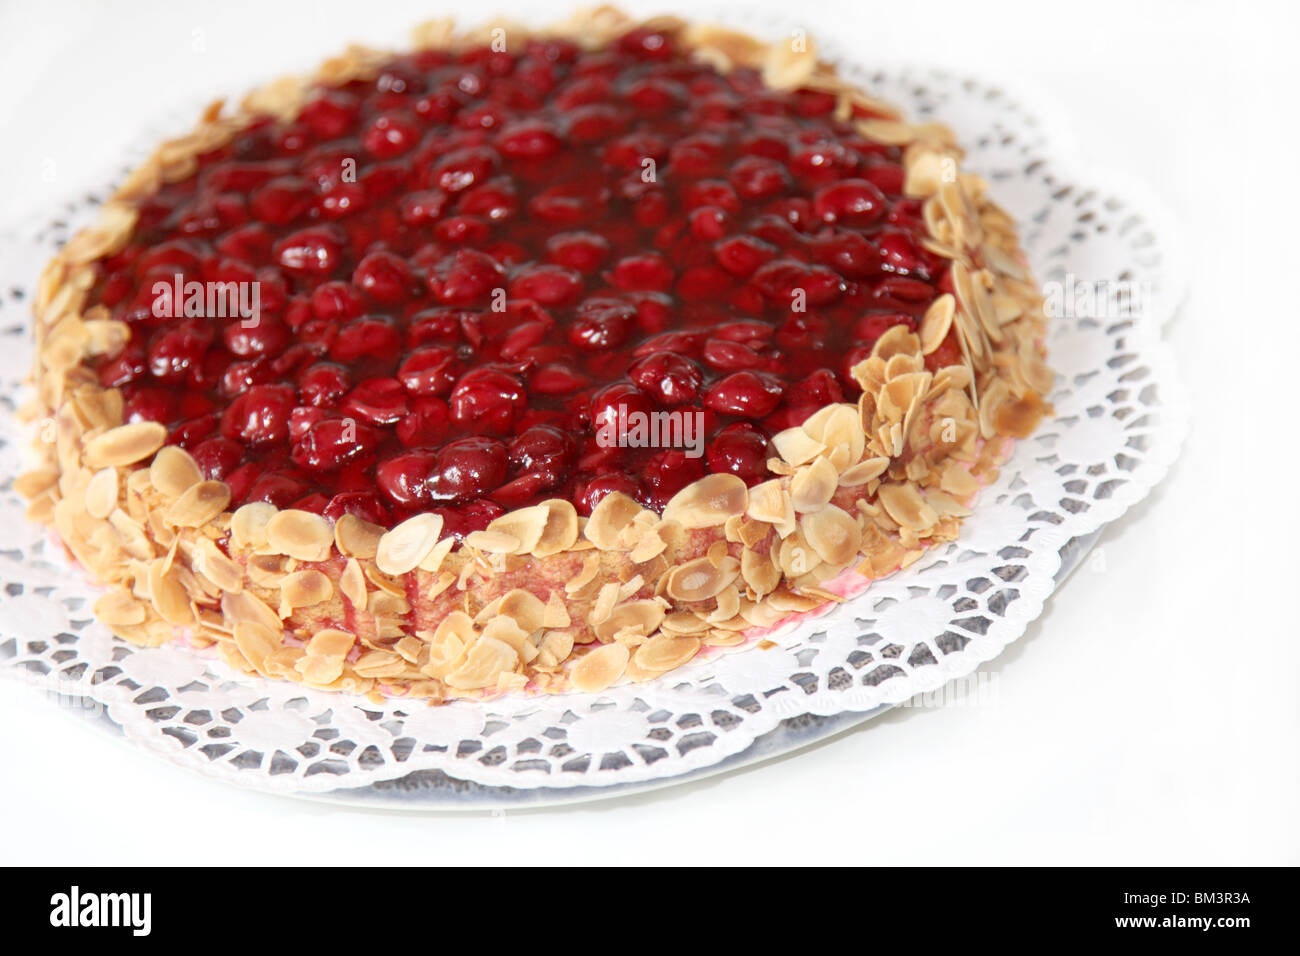 A cake with almond edge - close-up Stock Photo